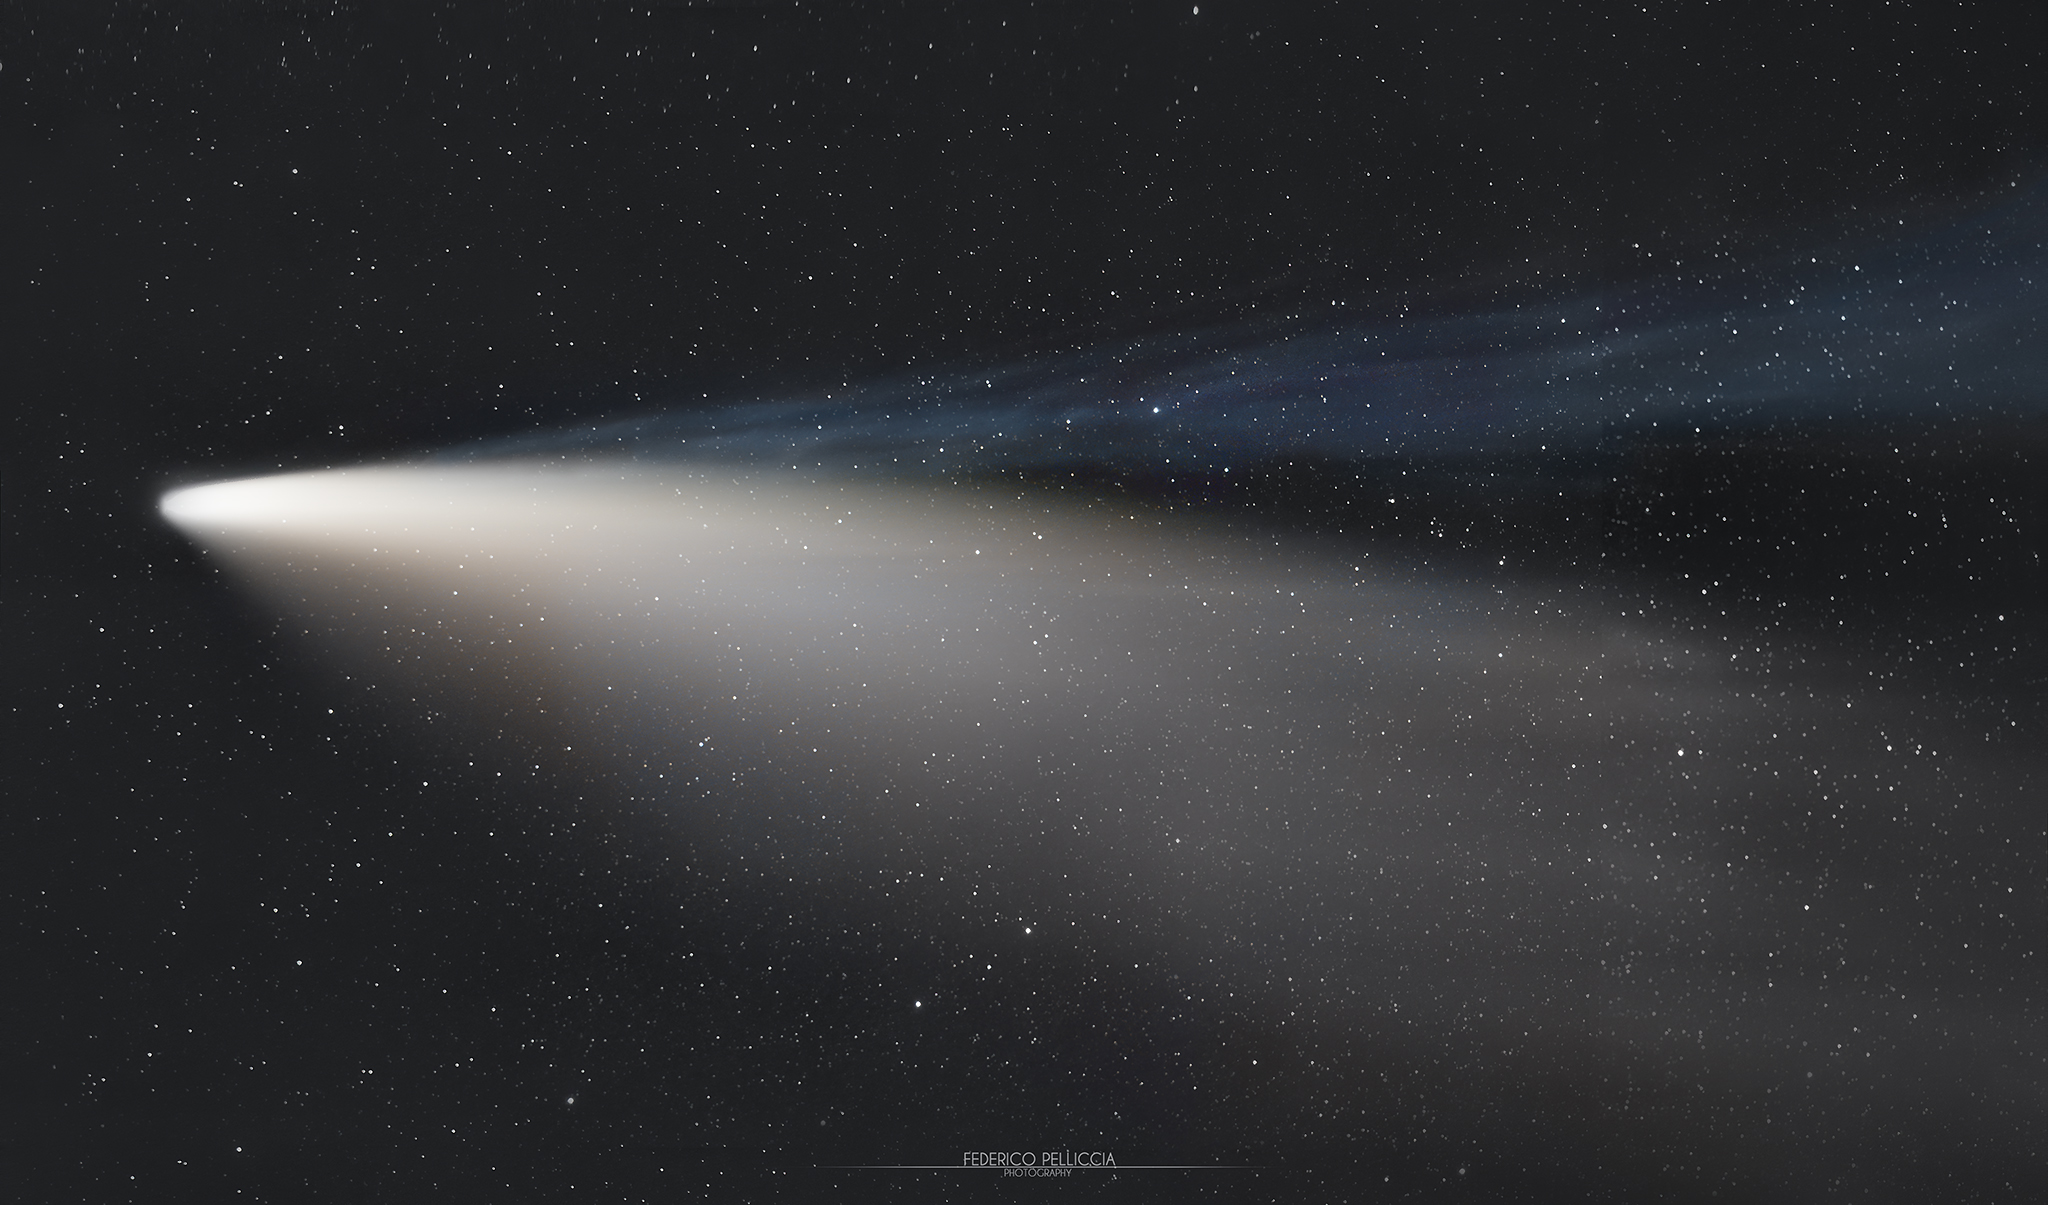 The double tail of comet C/2020 F3 Neowise...